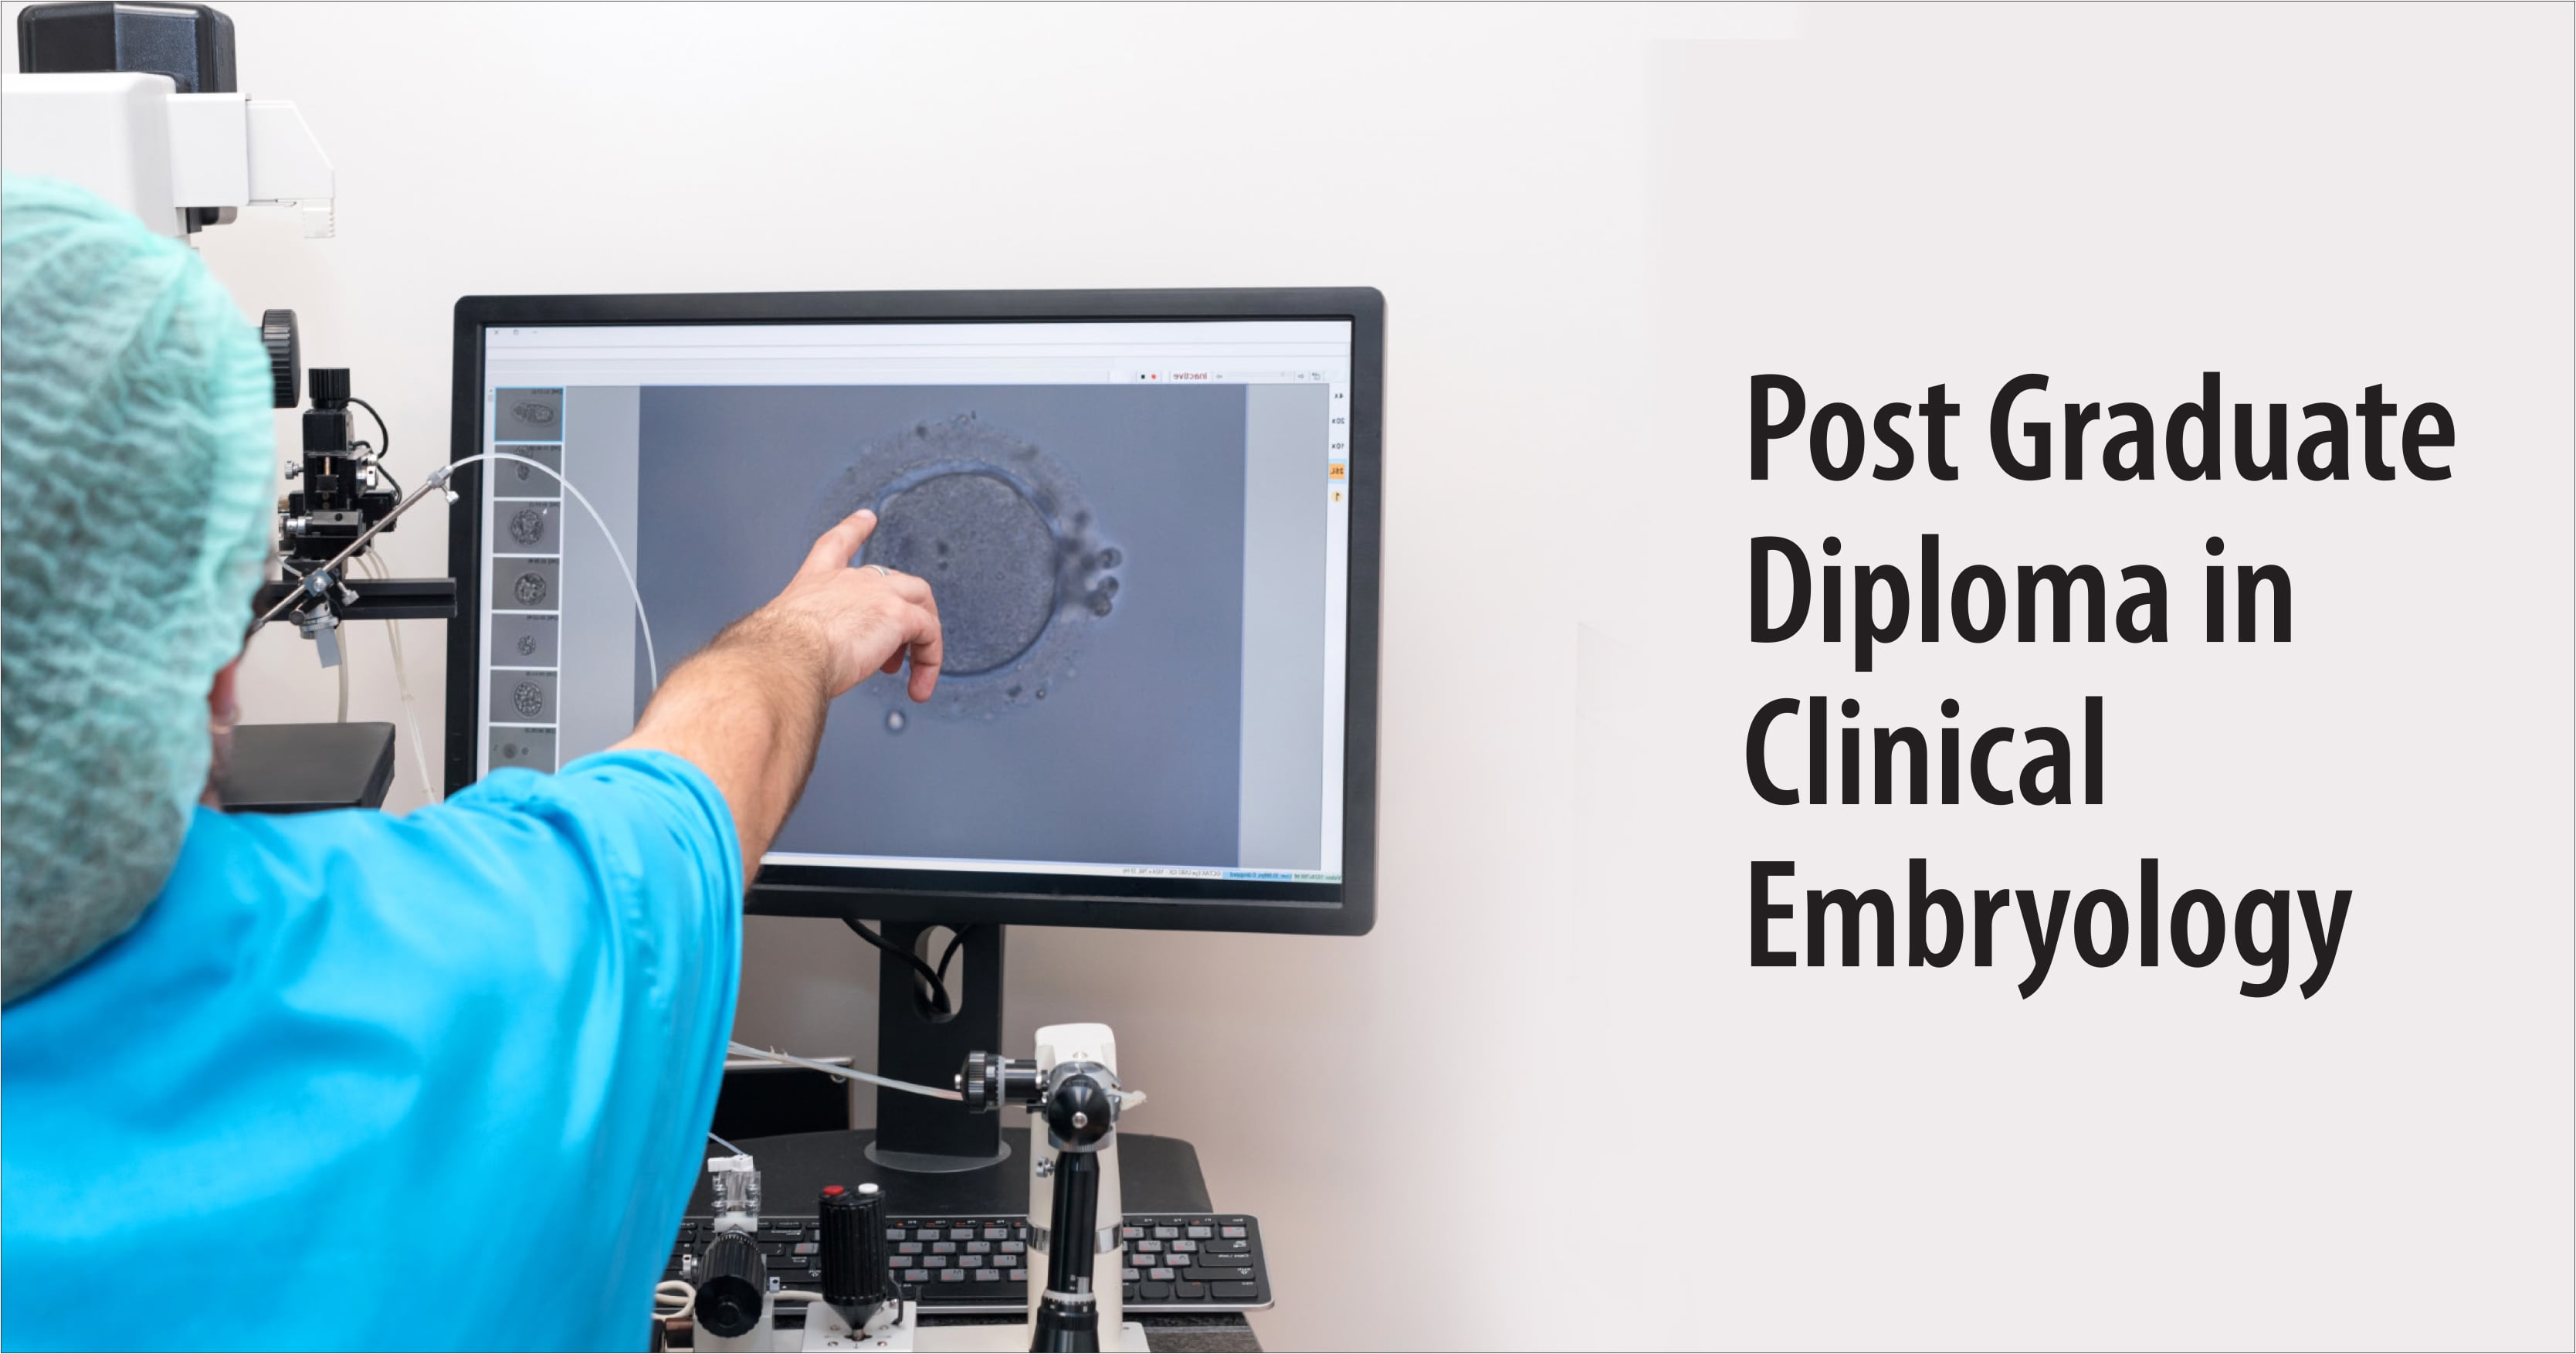 Post Graduate Diploma in Clinical Embryology